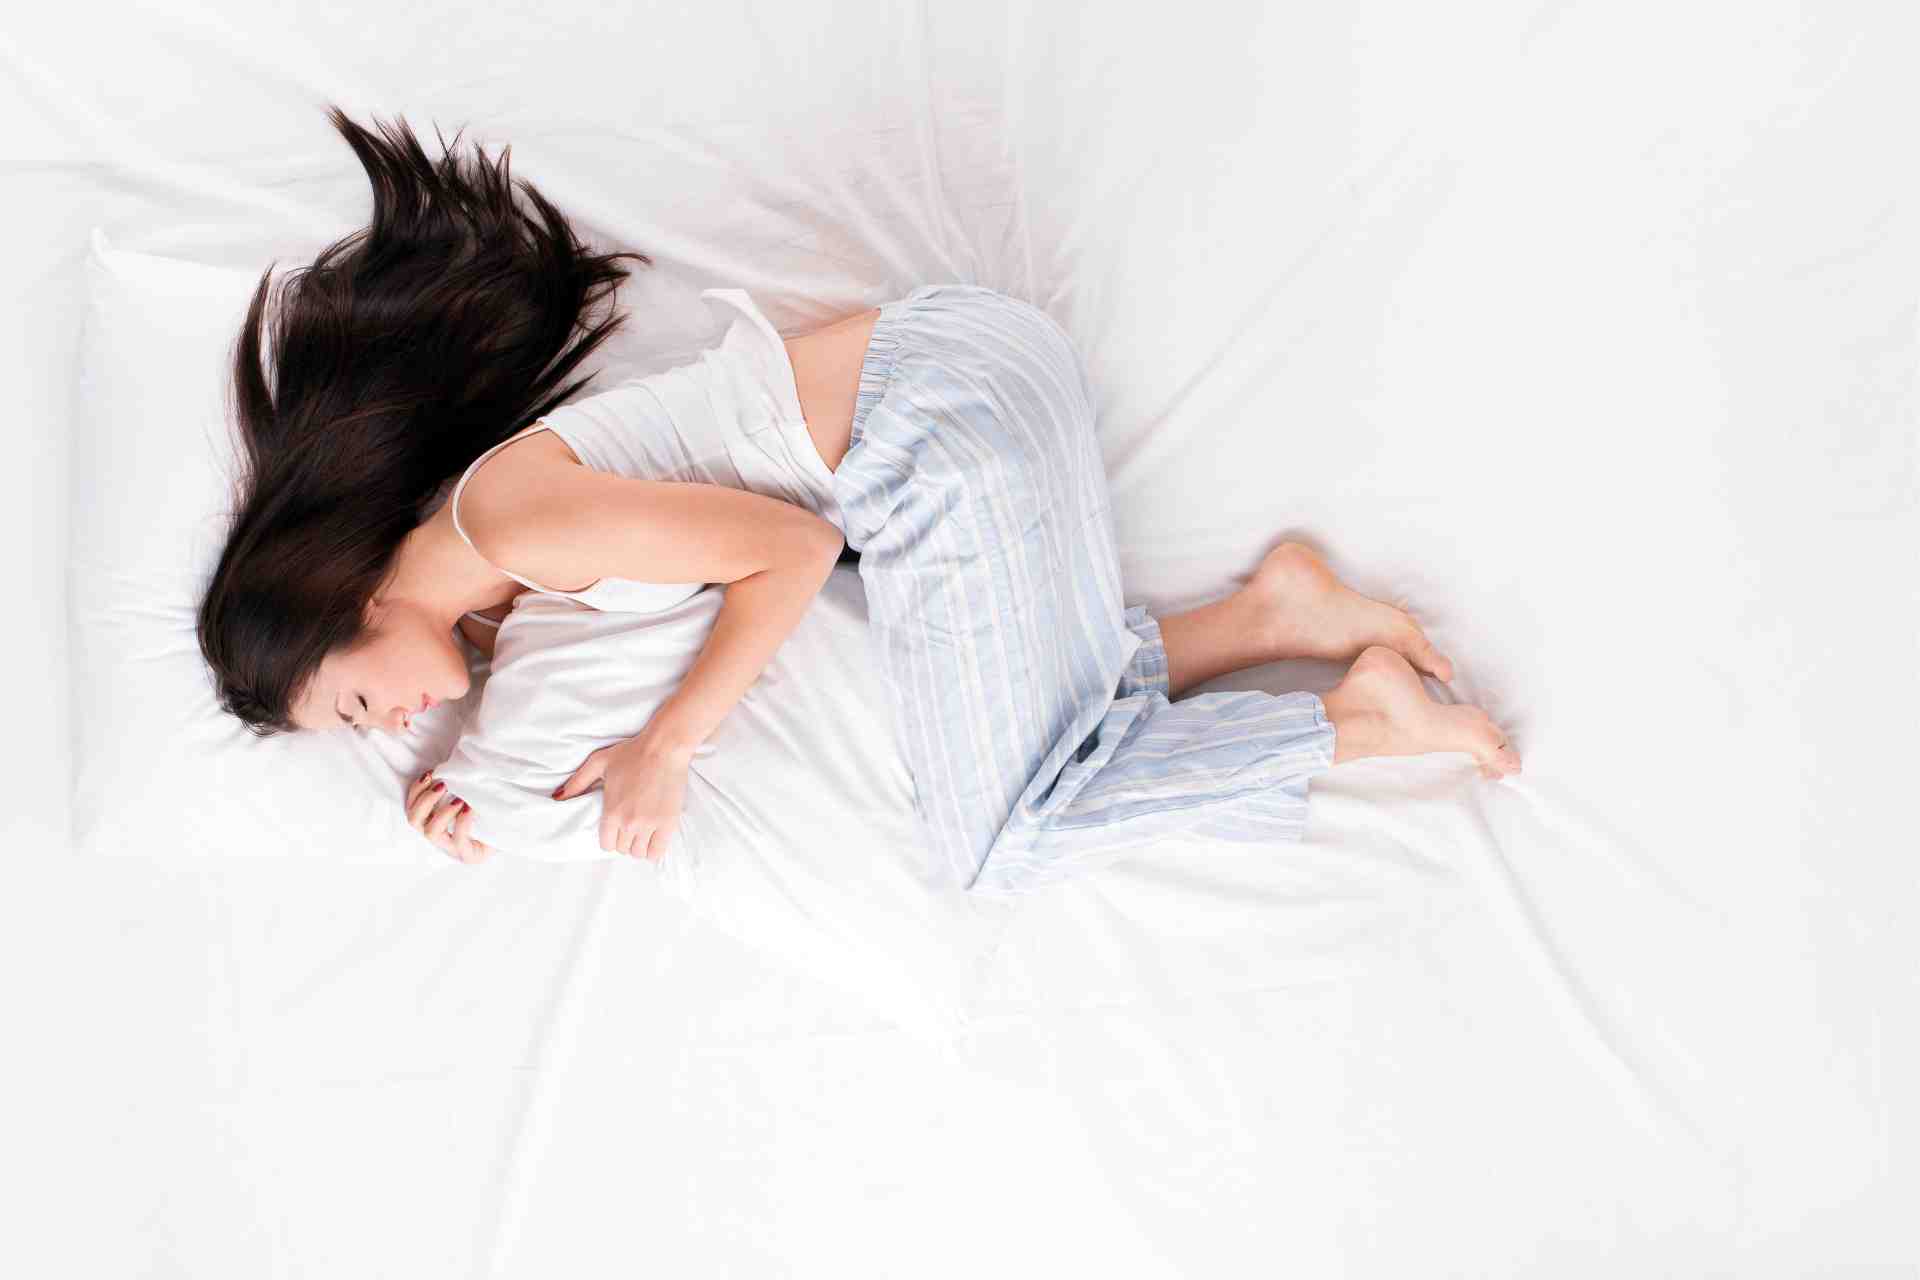 Sleeping Position To Lose Belly Fat Fetal Position